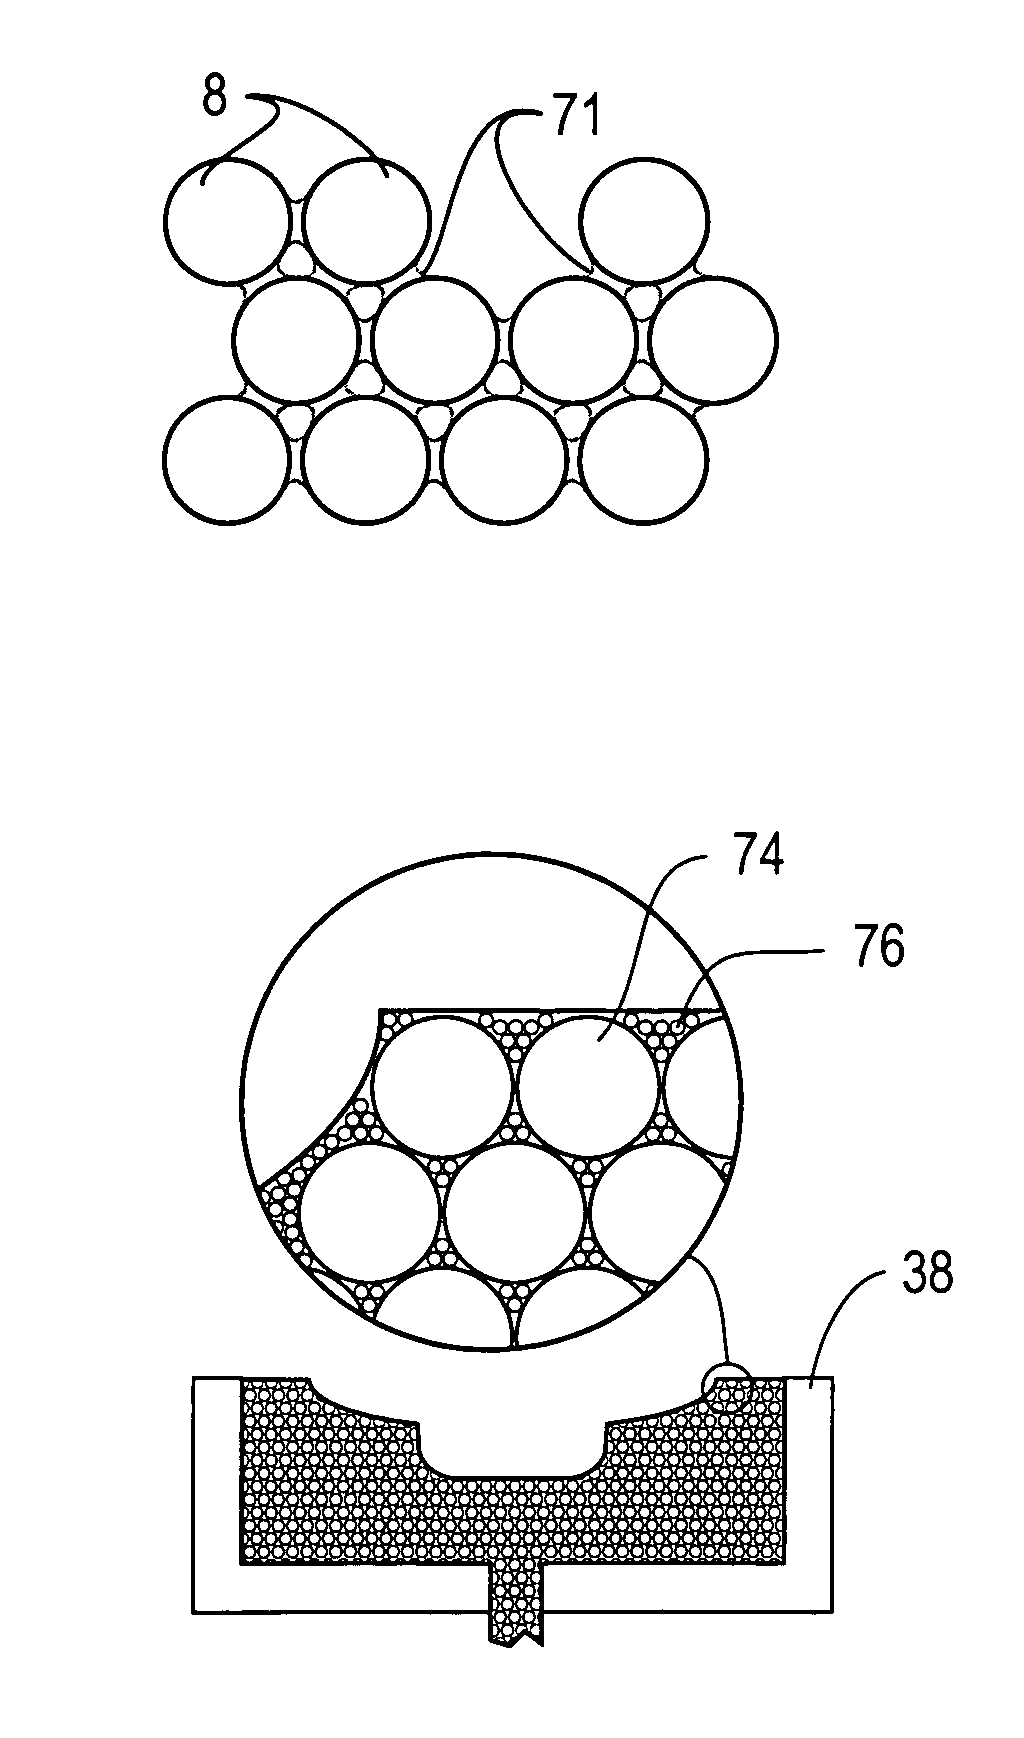 Use of state-change materials in reformable shapes, templates or tooling